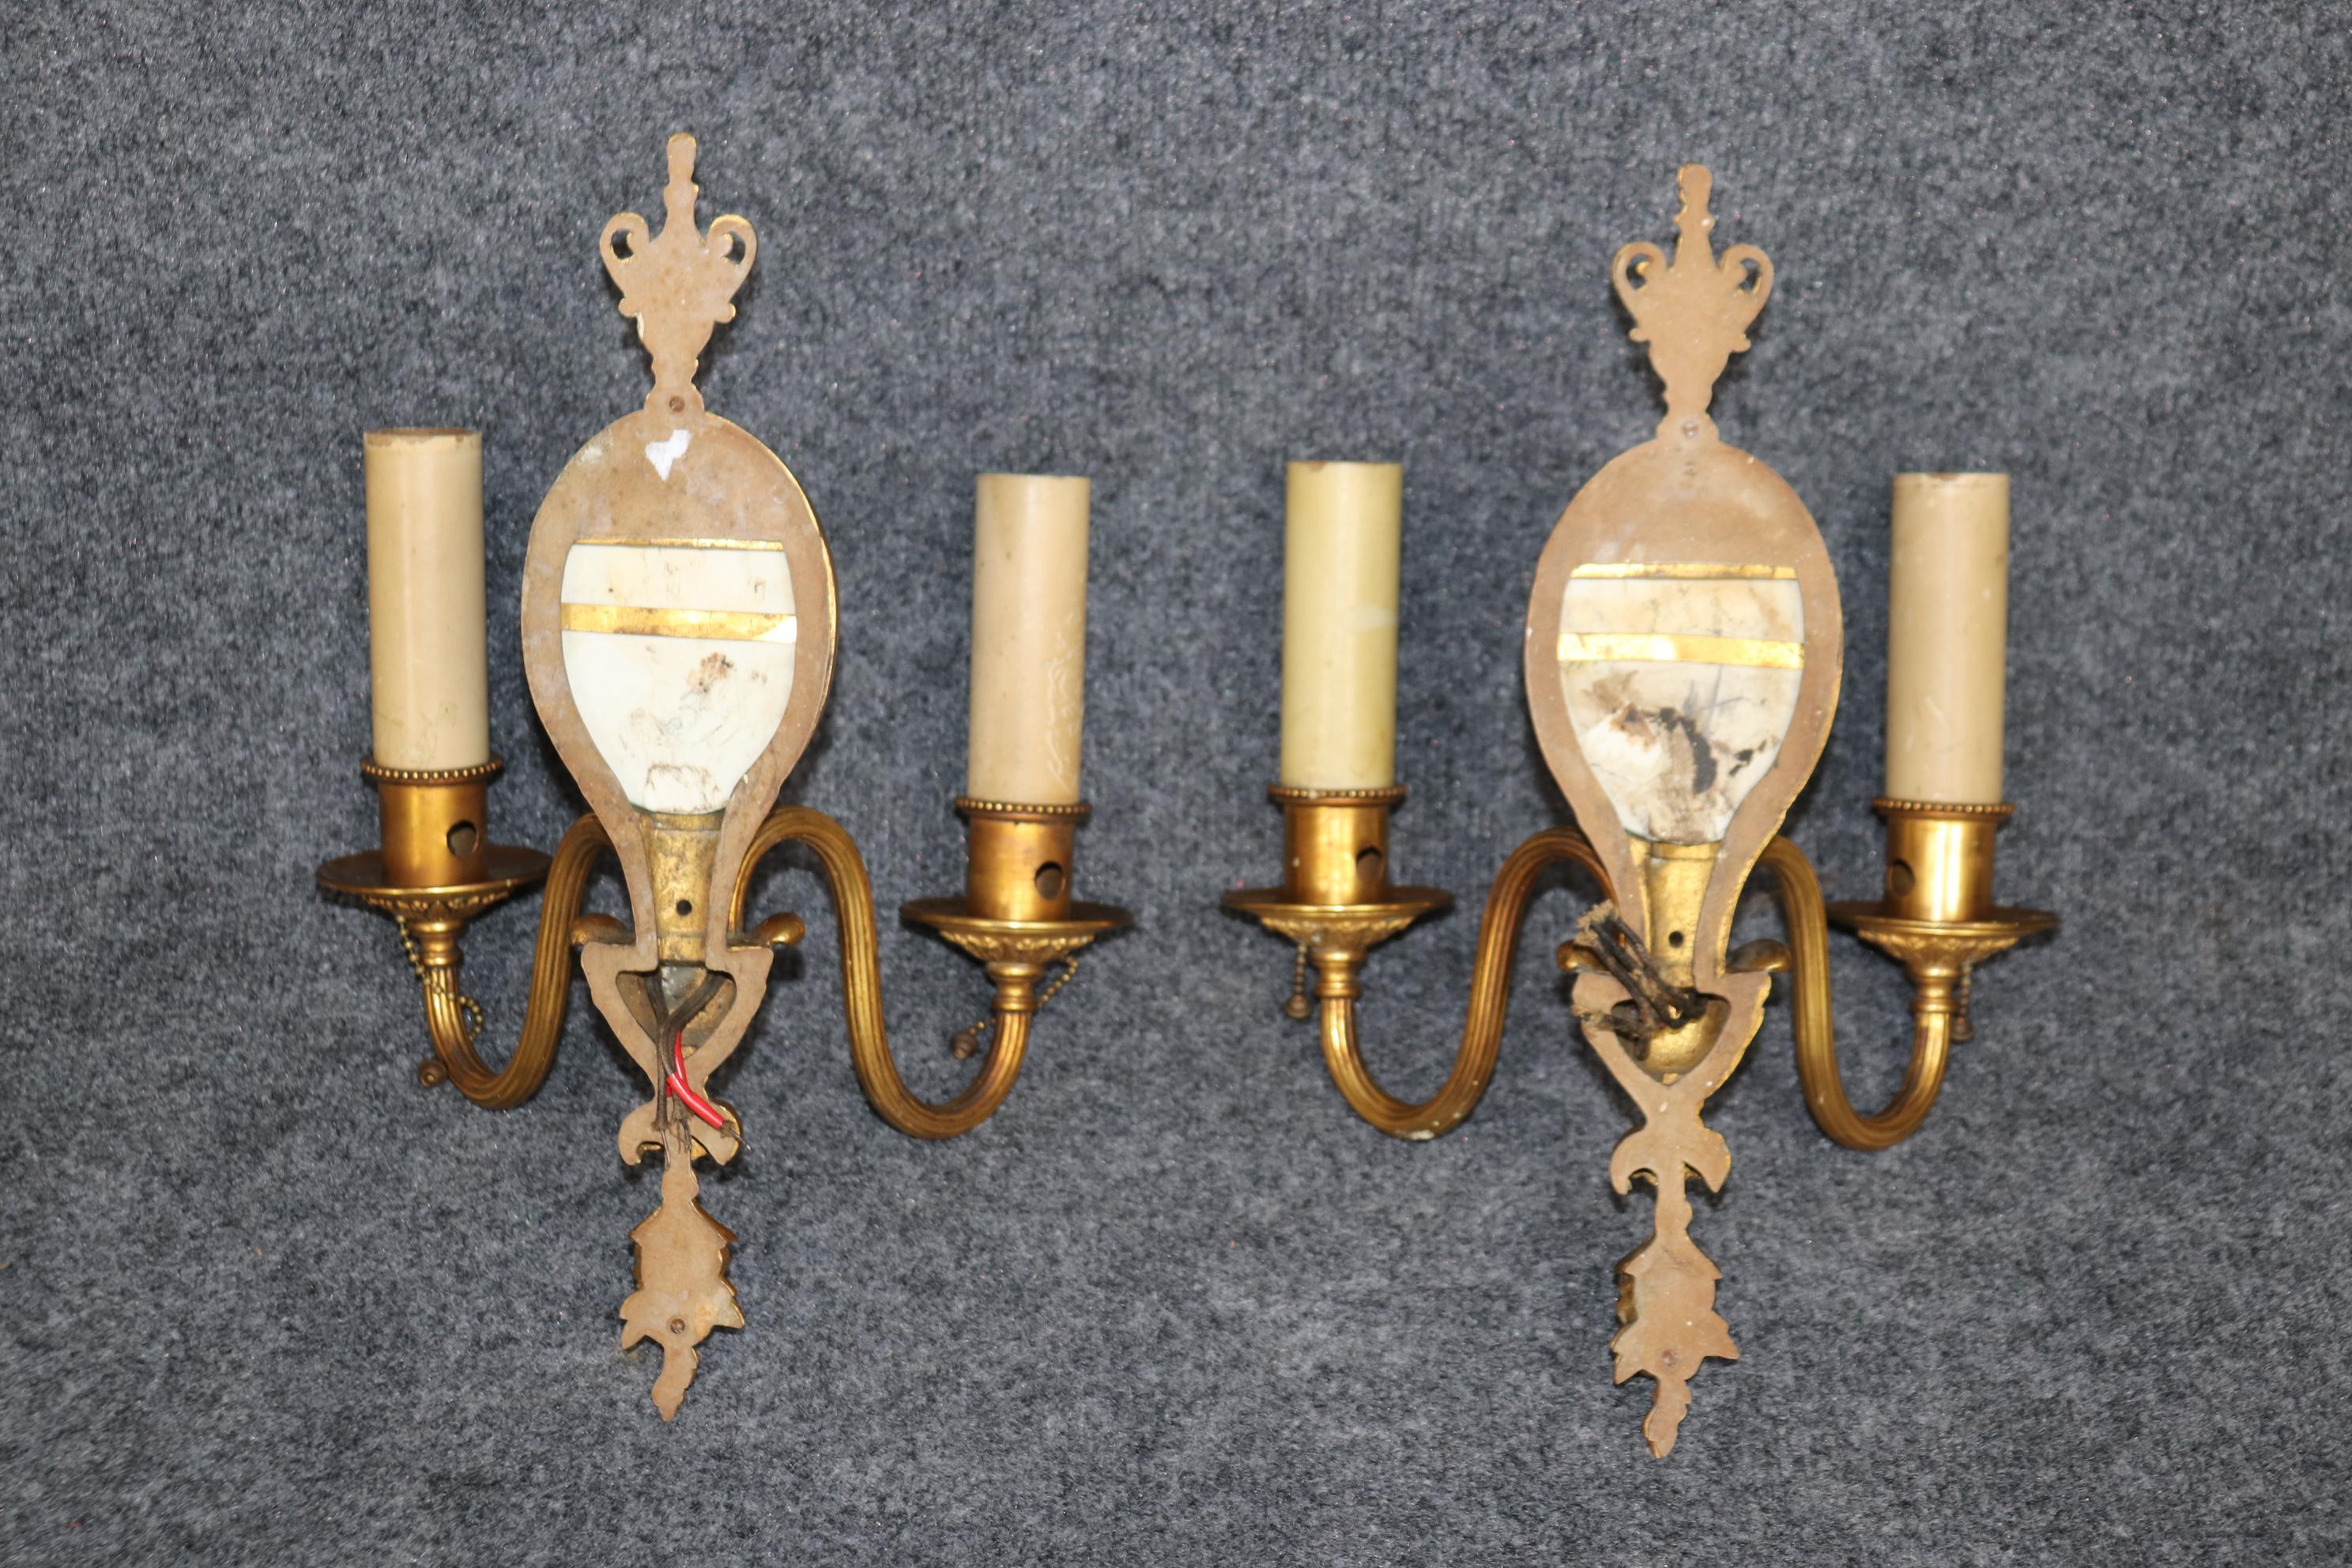 Dimensions- H: 14in W: 9 3/4in D: 5in

This pair of Louis XV style bronze ormolu sconces with wedgewood plaques is made of the highest quality and are a fine example of 19th century  decor. If you look at the photos provided, you will see the